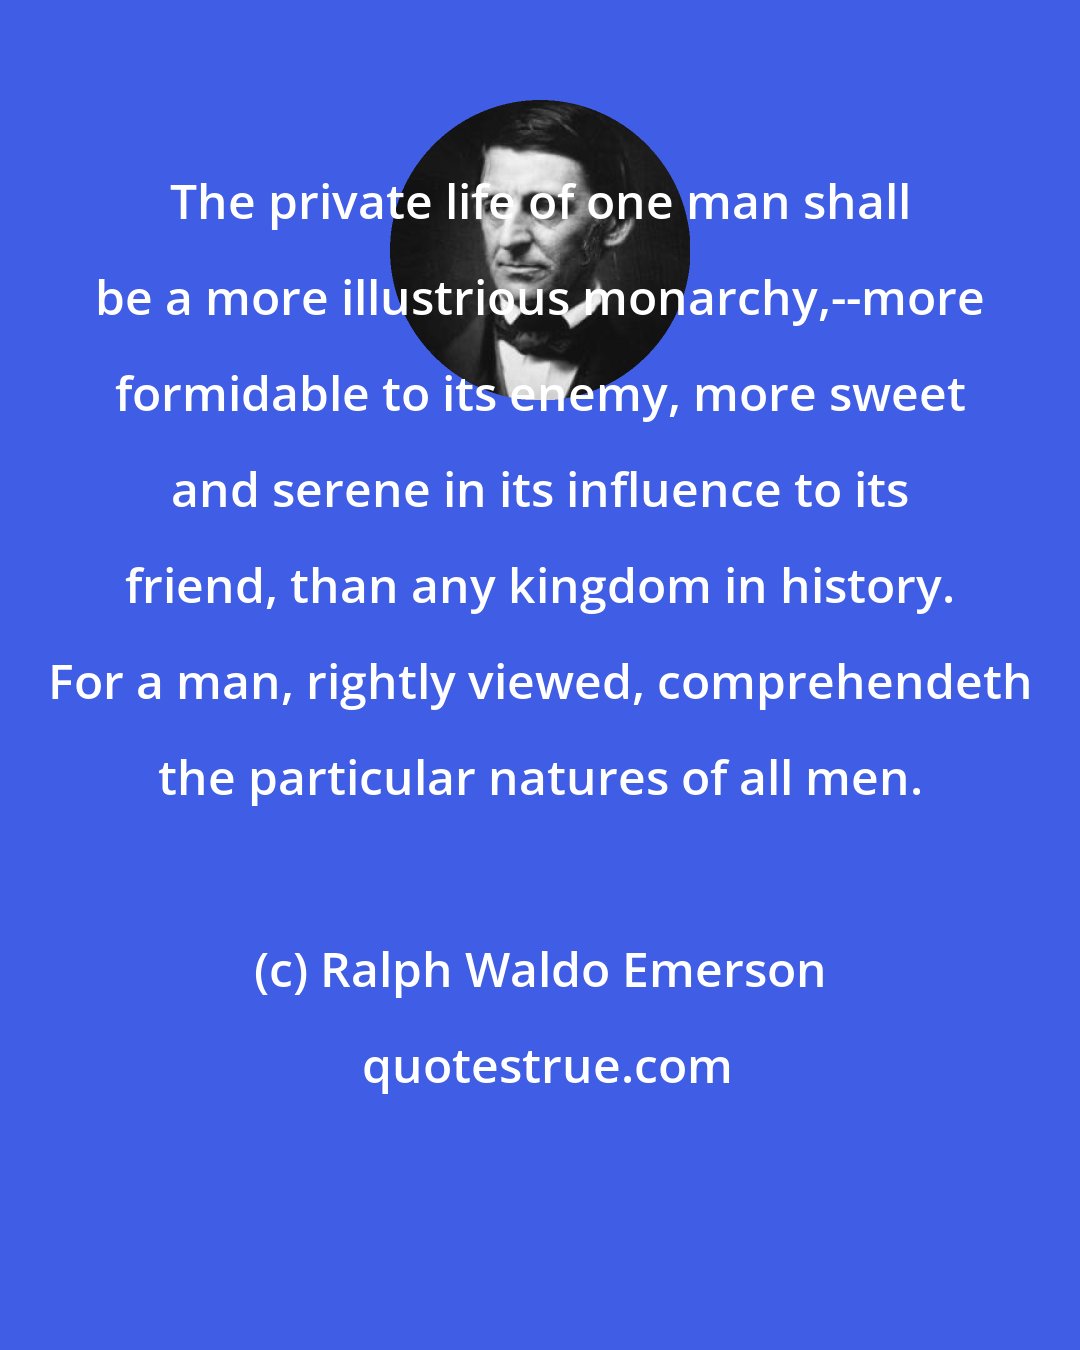 Ralph Waldo Emerson: The private life of one man shall be a more illustrious monarchy,--more formidable to its enemy, more sweet and serene in its influence to its friend, than any kingdom in history. For a man, rightly viewed, comprehendeth the particular natures of all men.